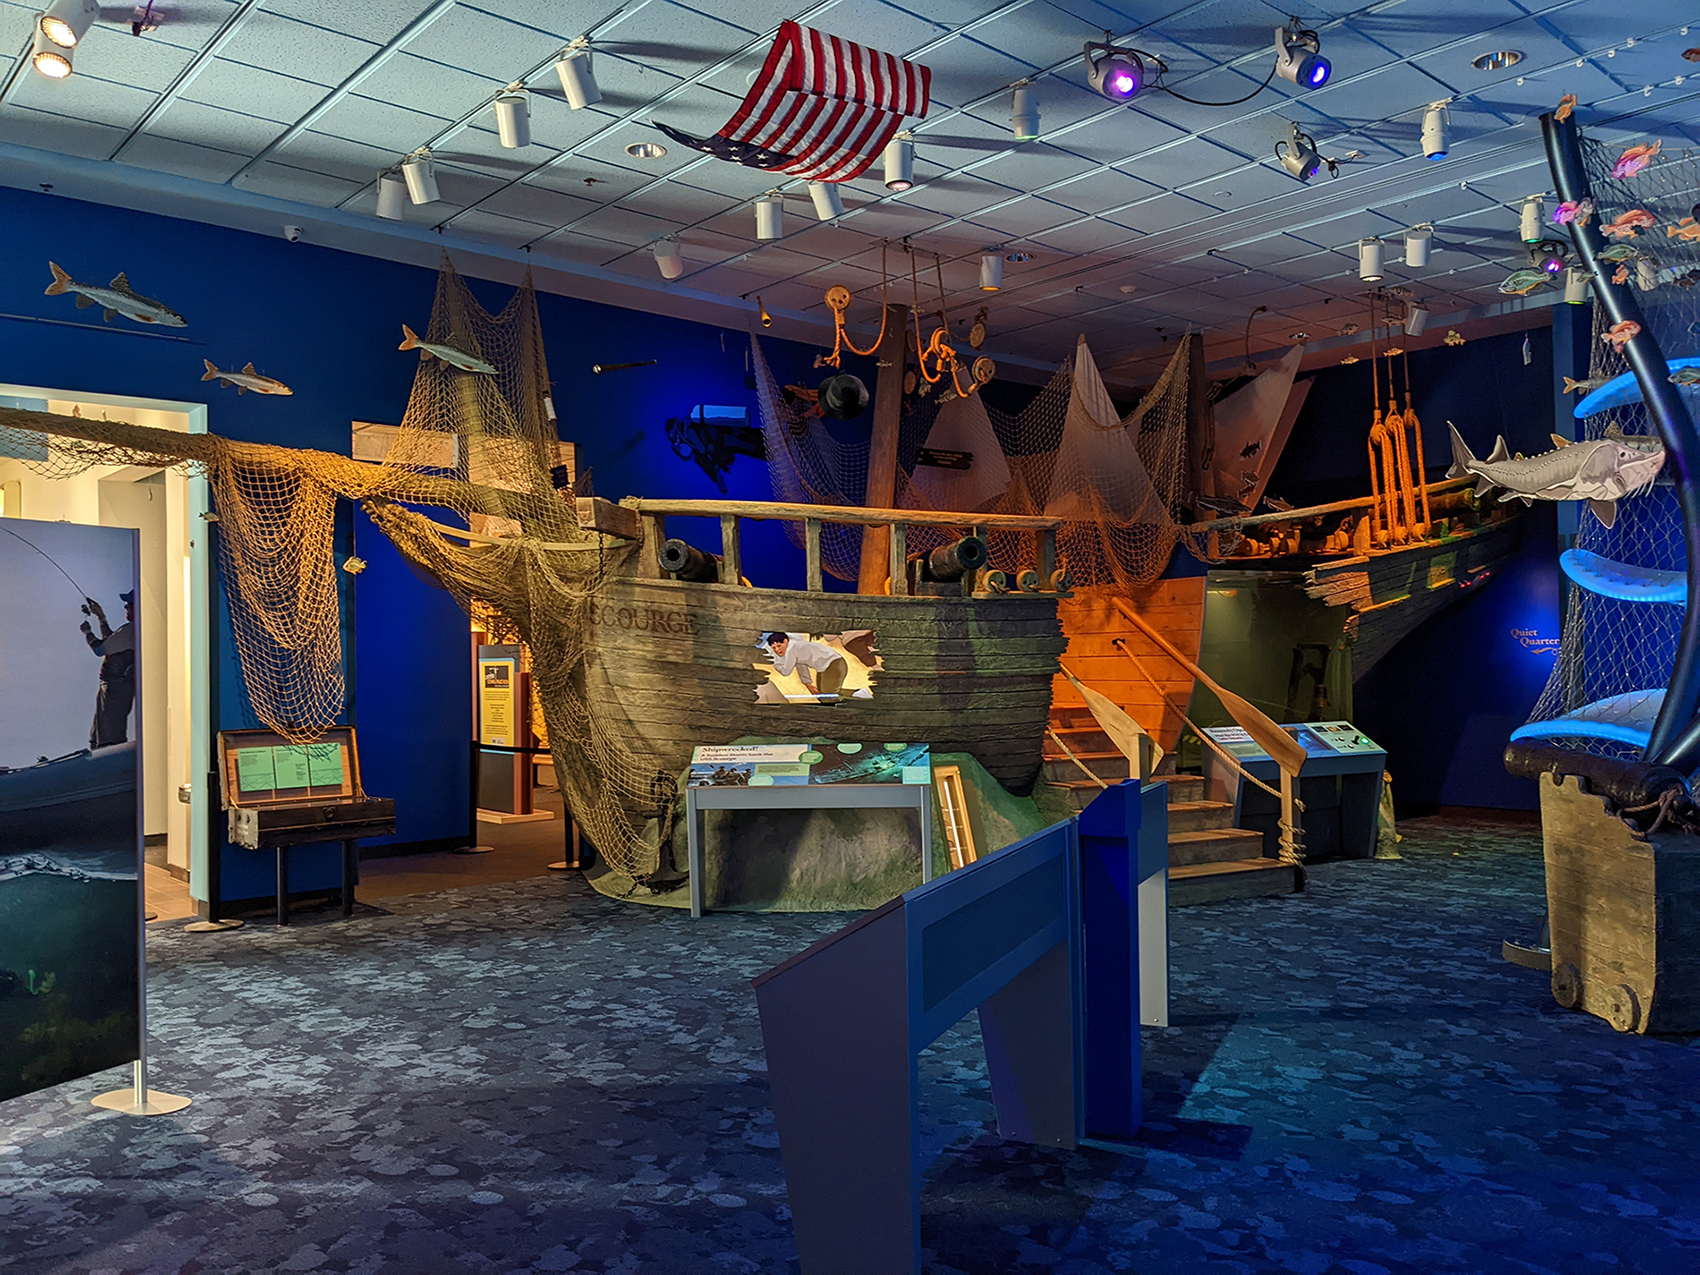 A wide view of a ship replica in the center of an exhibit.